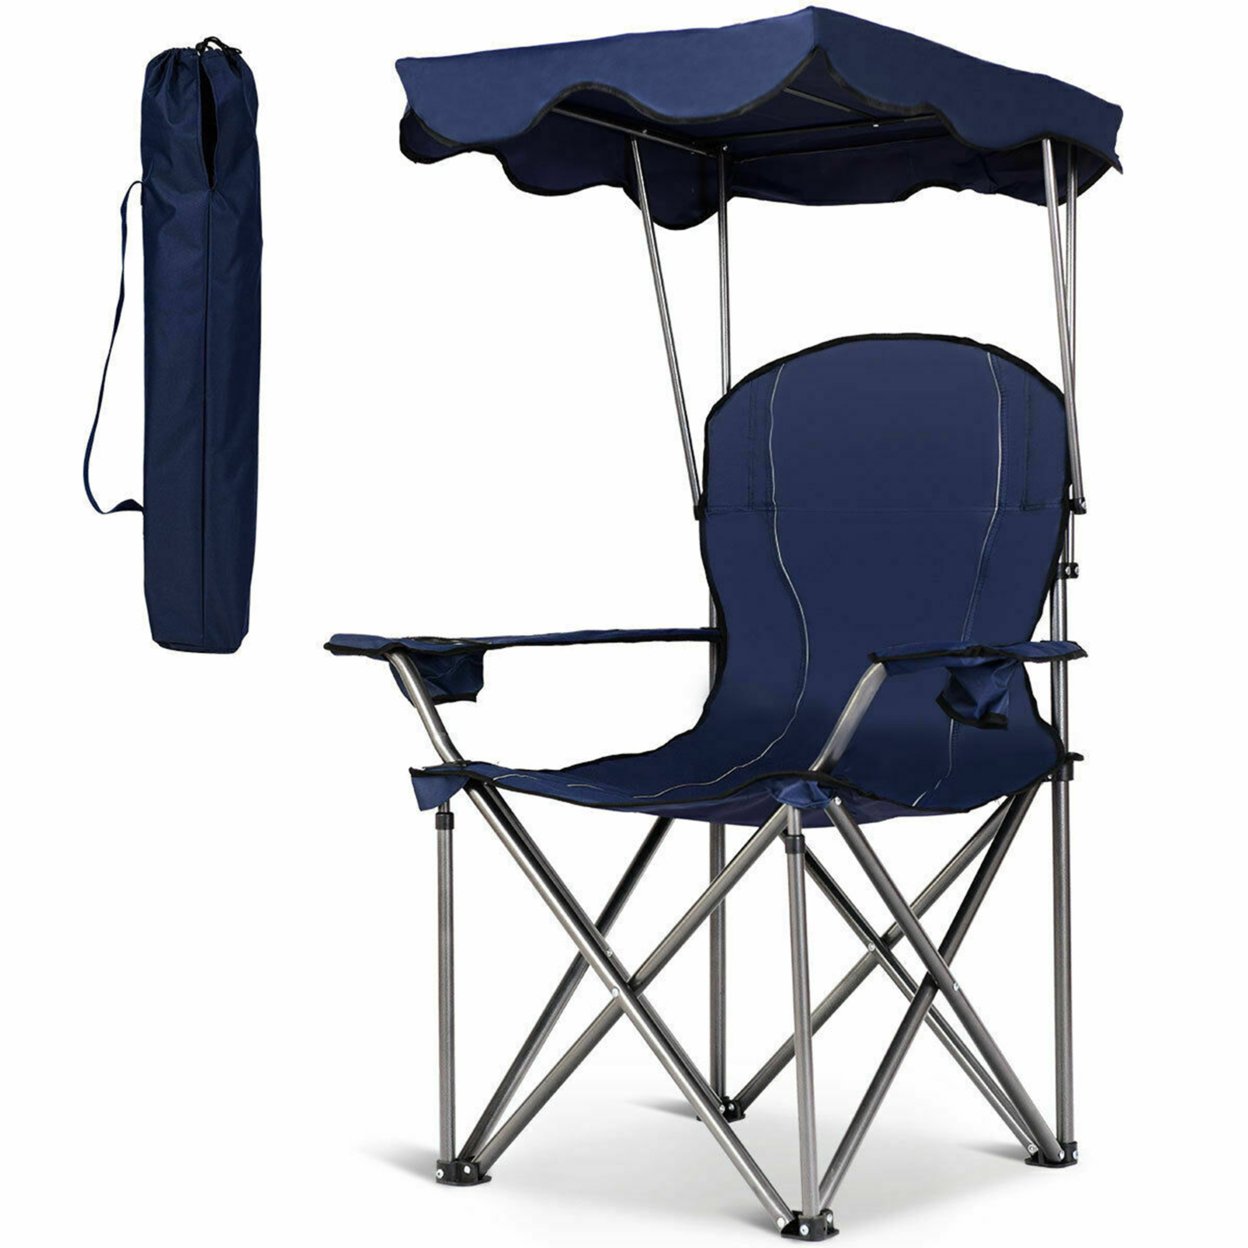 Folding Canopy Camping Chair Portable Beach Chair W/ Carrying Bag - Blue